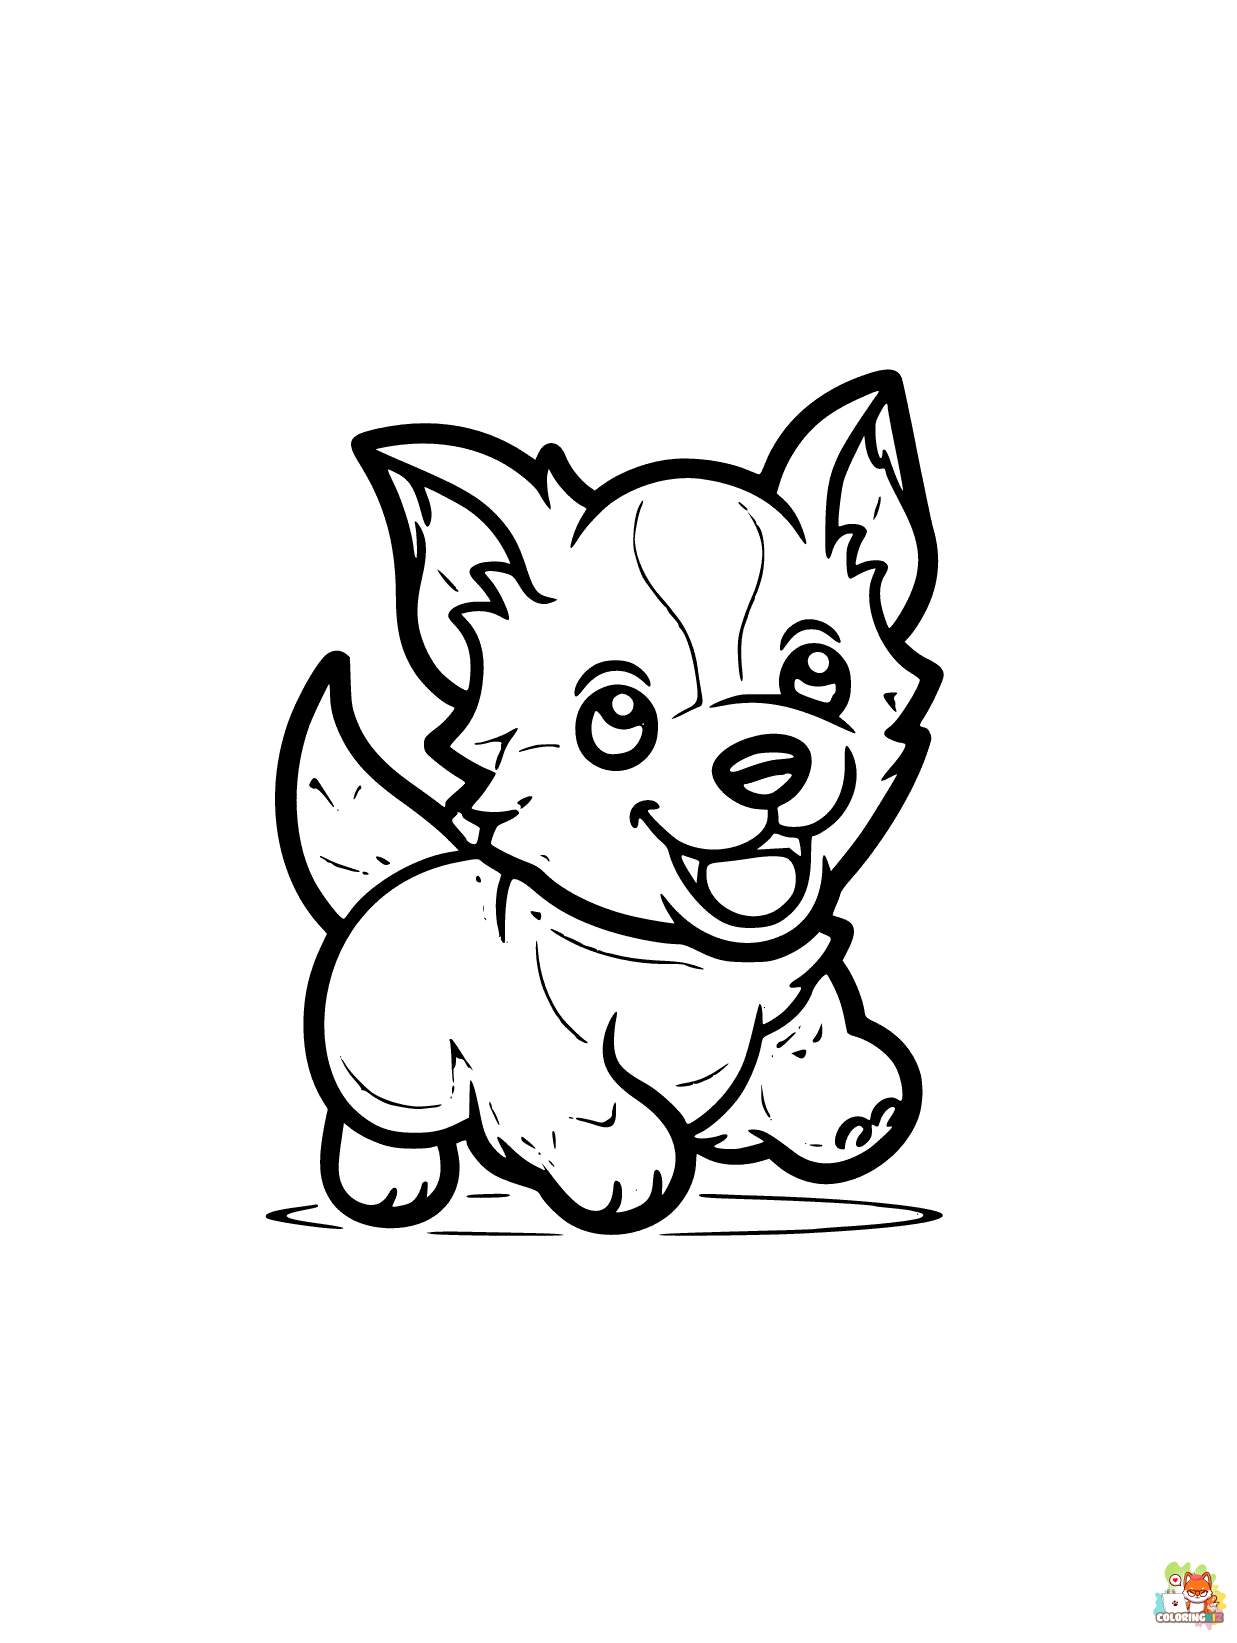 N1 Midjourney Dog Coloring pages for kids A dog playing fetch w 5ddaa116 a5d3 4d99 b77c 0ed1fce18381 edge